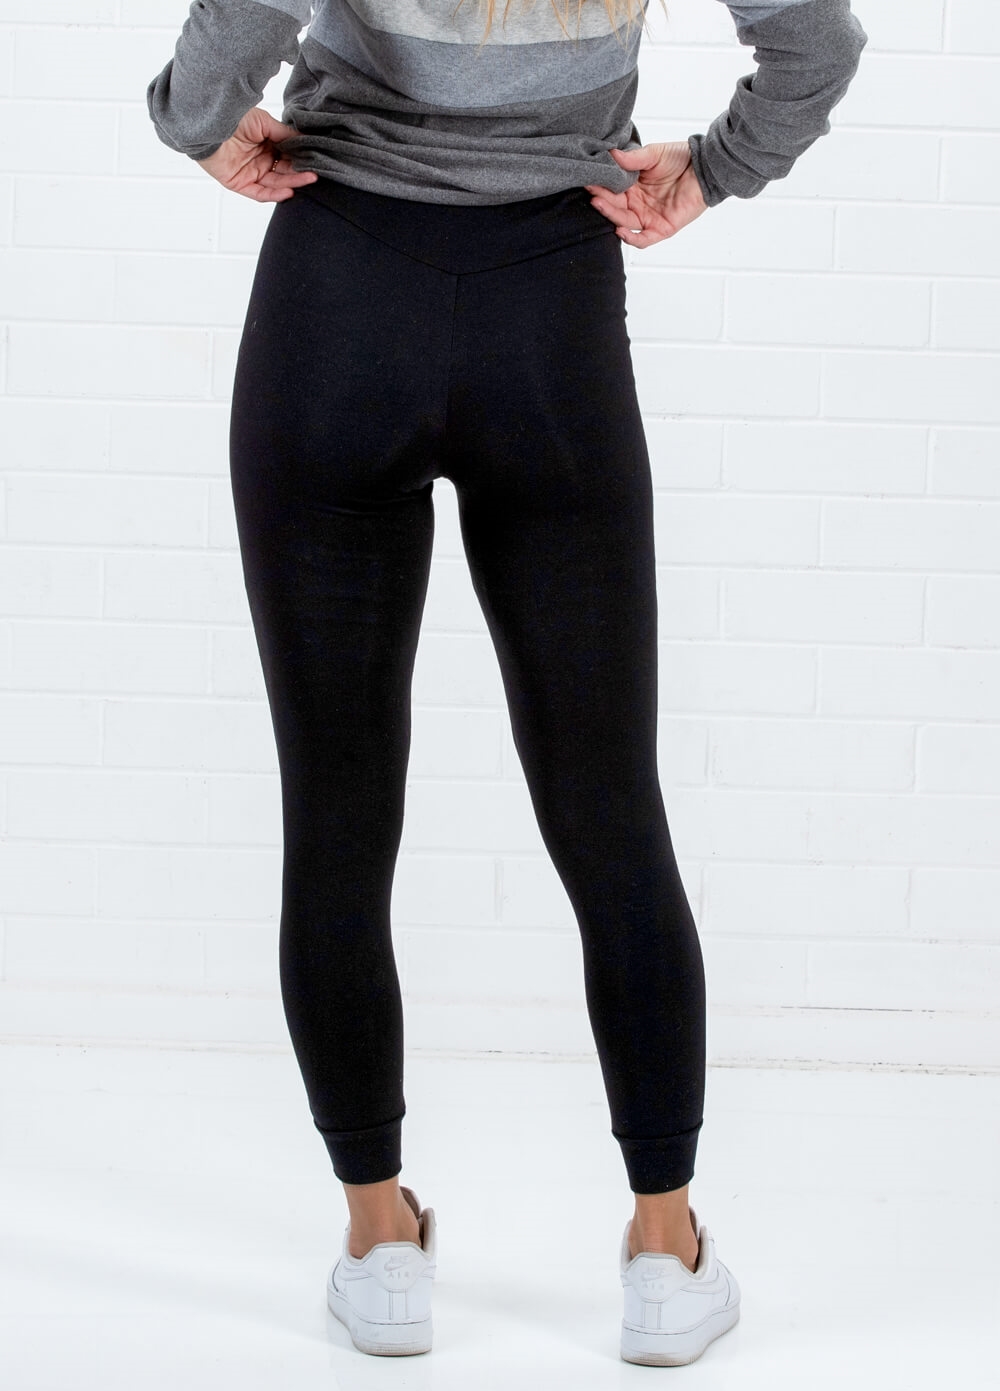 Lait & Co - Ninette Maternity Jogger Pants in Black | Queen Bee